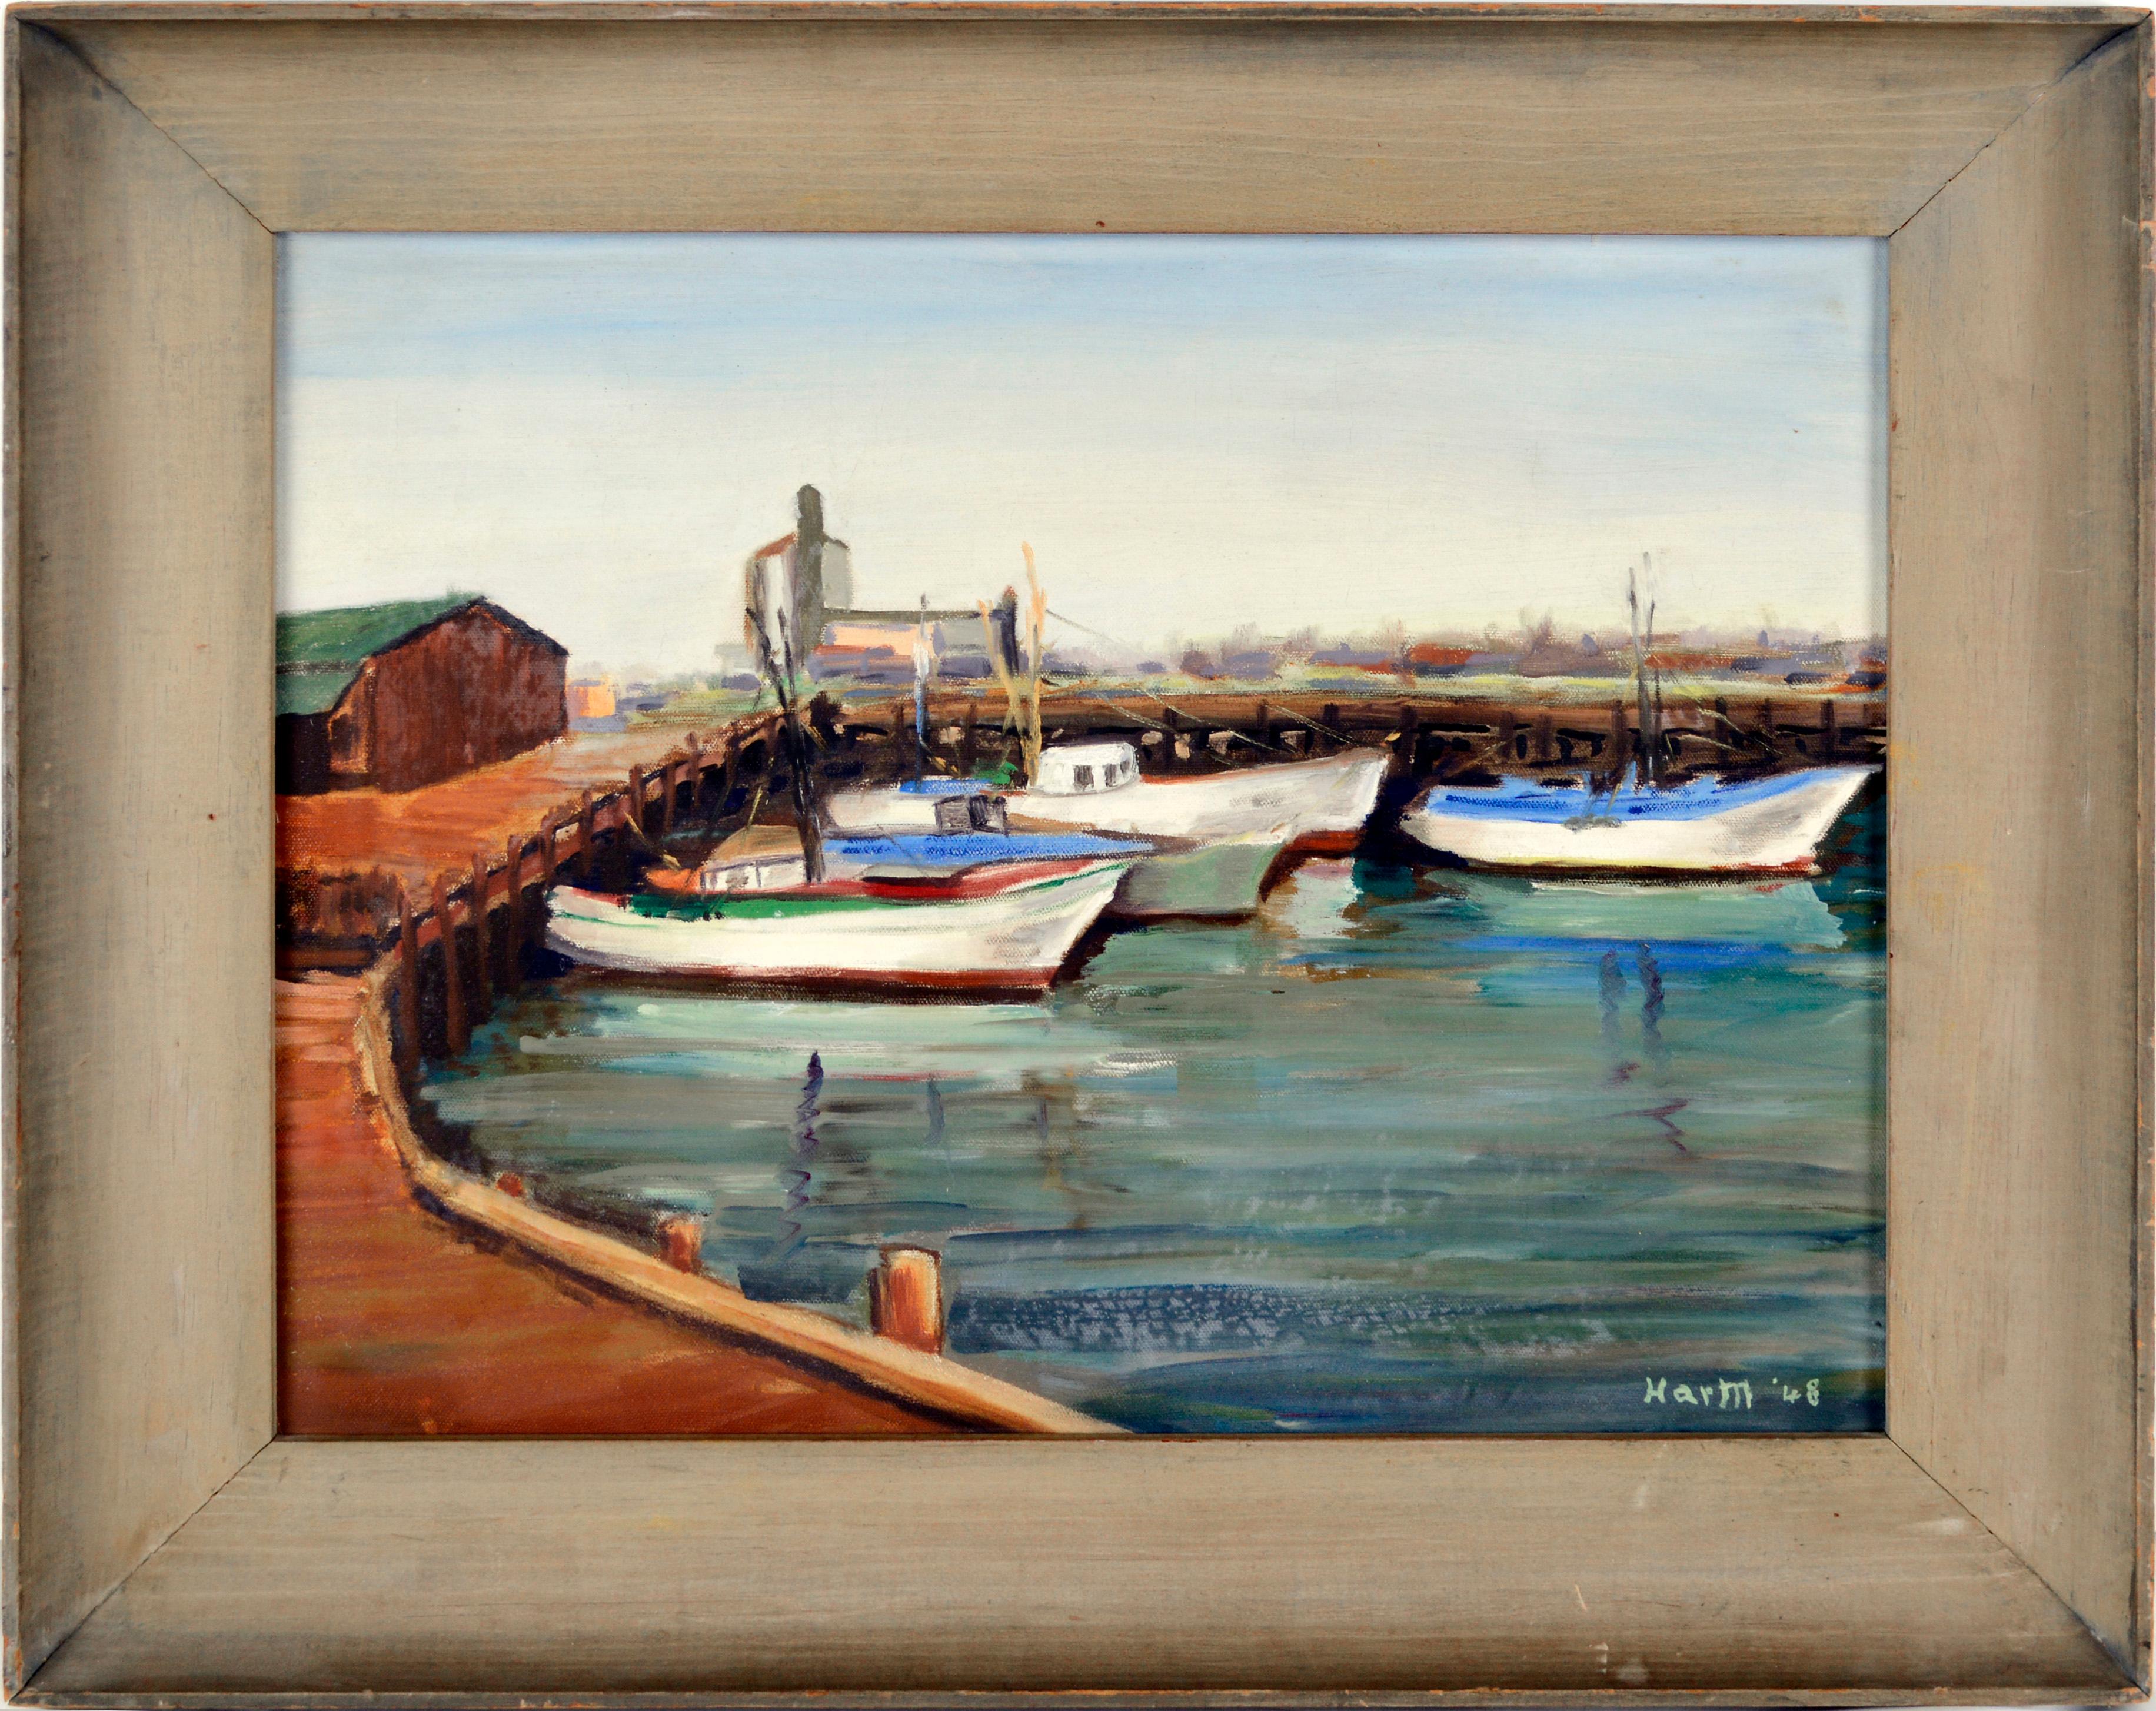 Harry Mishkin Landscape Painting - "Day of Rest" San Pedro Harbor Fishing Boats Oil on Linen 1948